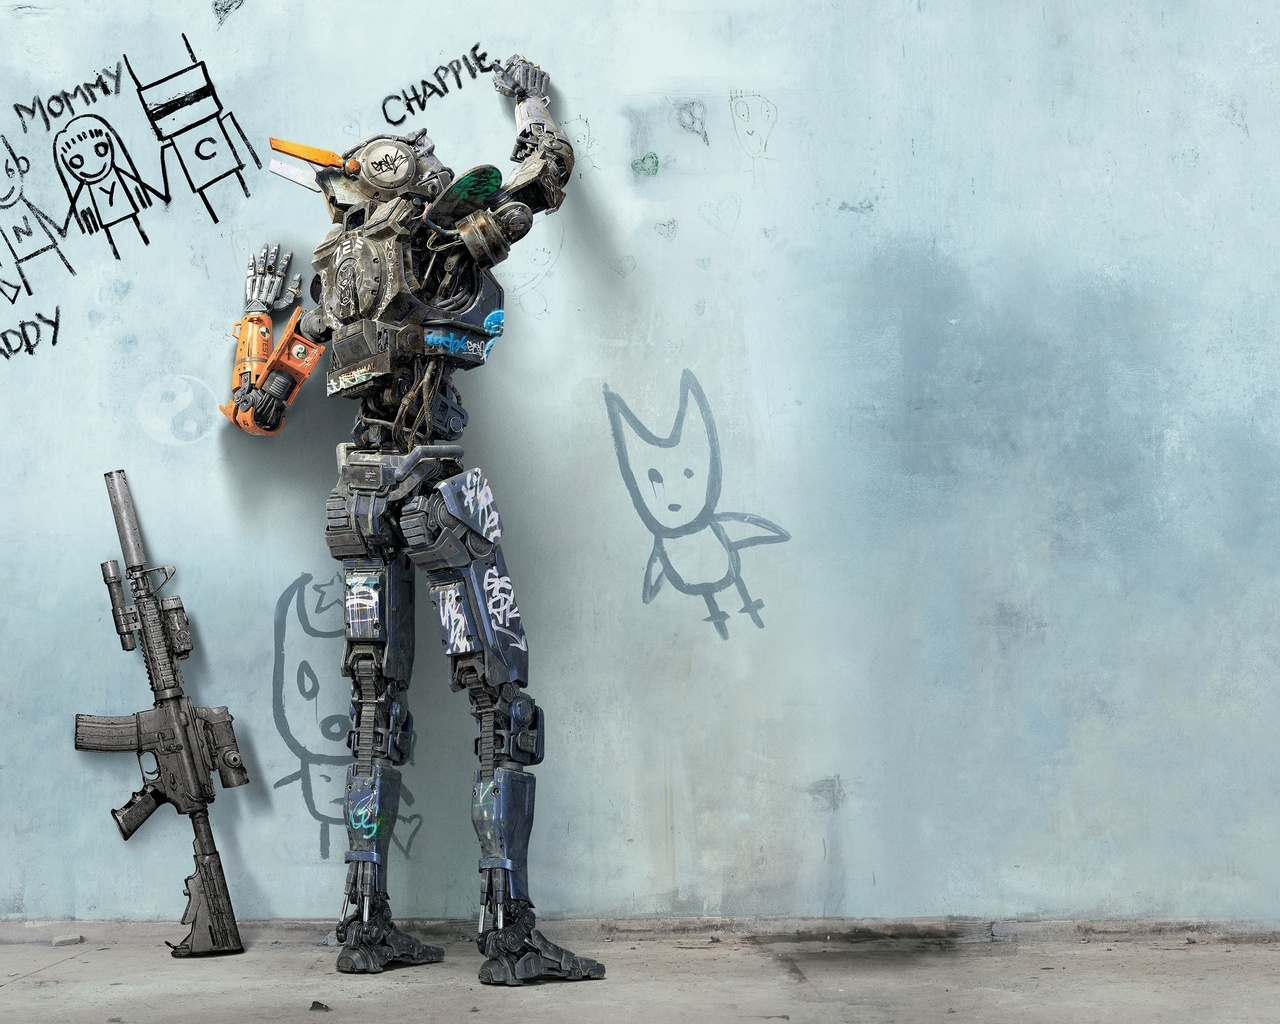 Chappie Movie 2015 for 1280 x 1024 resolution